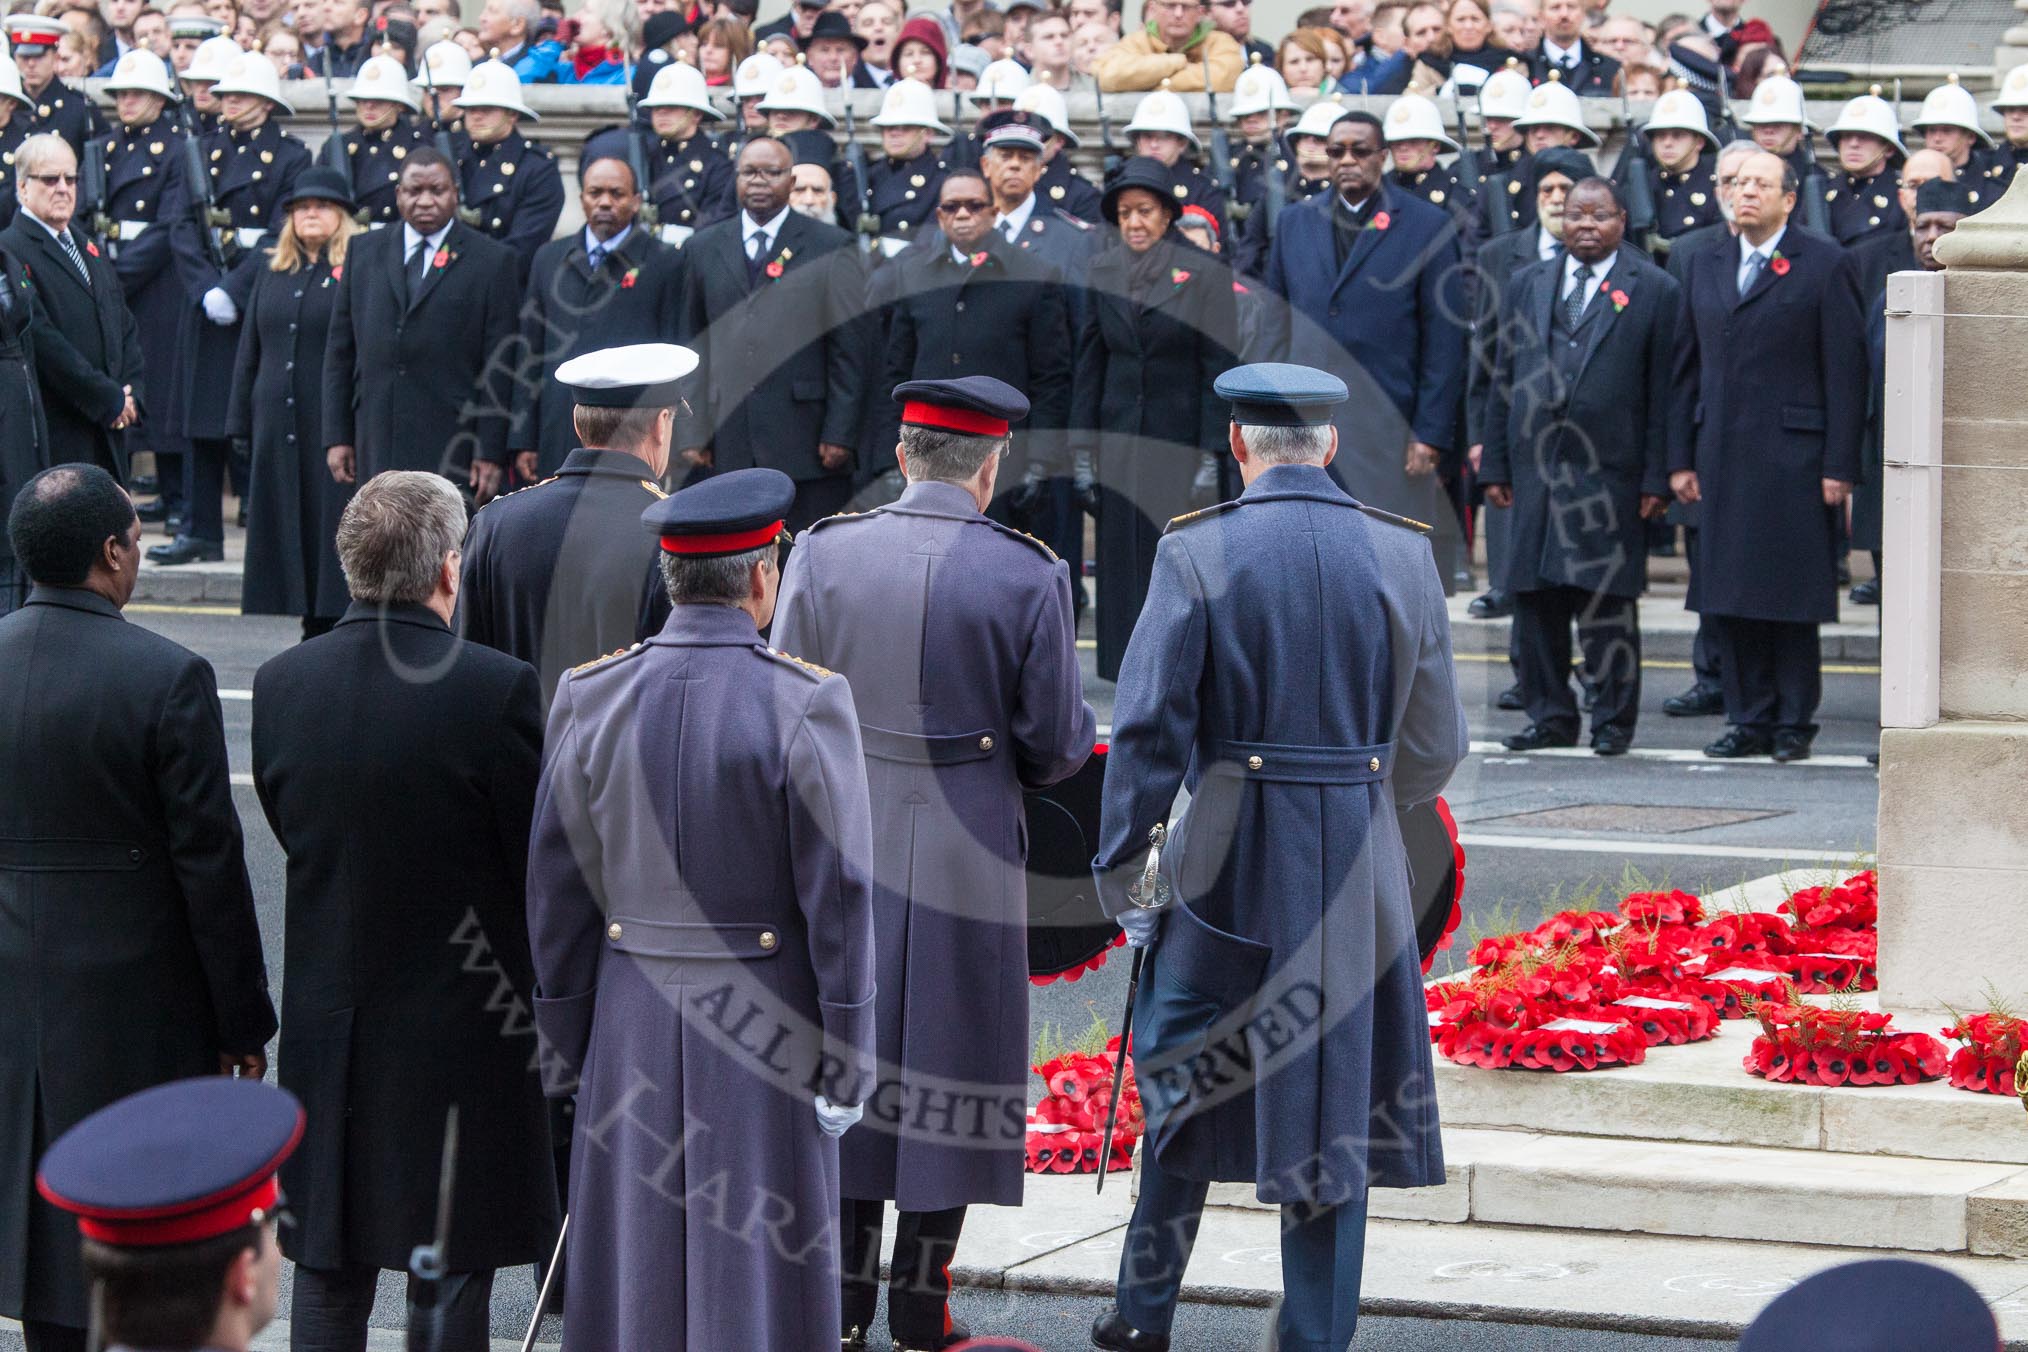 Remembrance Sunday at the Cenotaph in London 2014: Admiral Sir George Zambellas, representing the Royal Navy, General Sir Nicholas Houghton  as the Chief of the Defence Staff, and Air Chief Marshall Sir Andrew Pulford for the RAF laying their wreaths together.
Press stand opposite the Foreign Office building, Whitehall, London SW1,
London,
Greater London,
United Kingdom,
on 09 November 2014 at 11:14, image #258